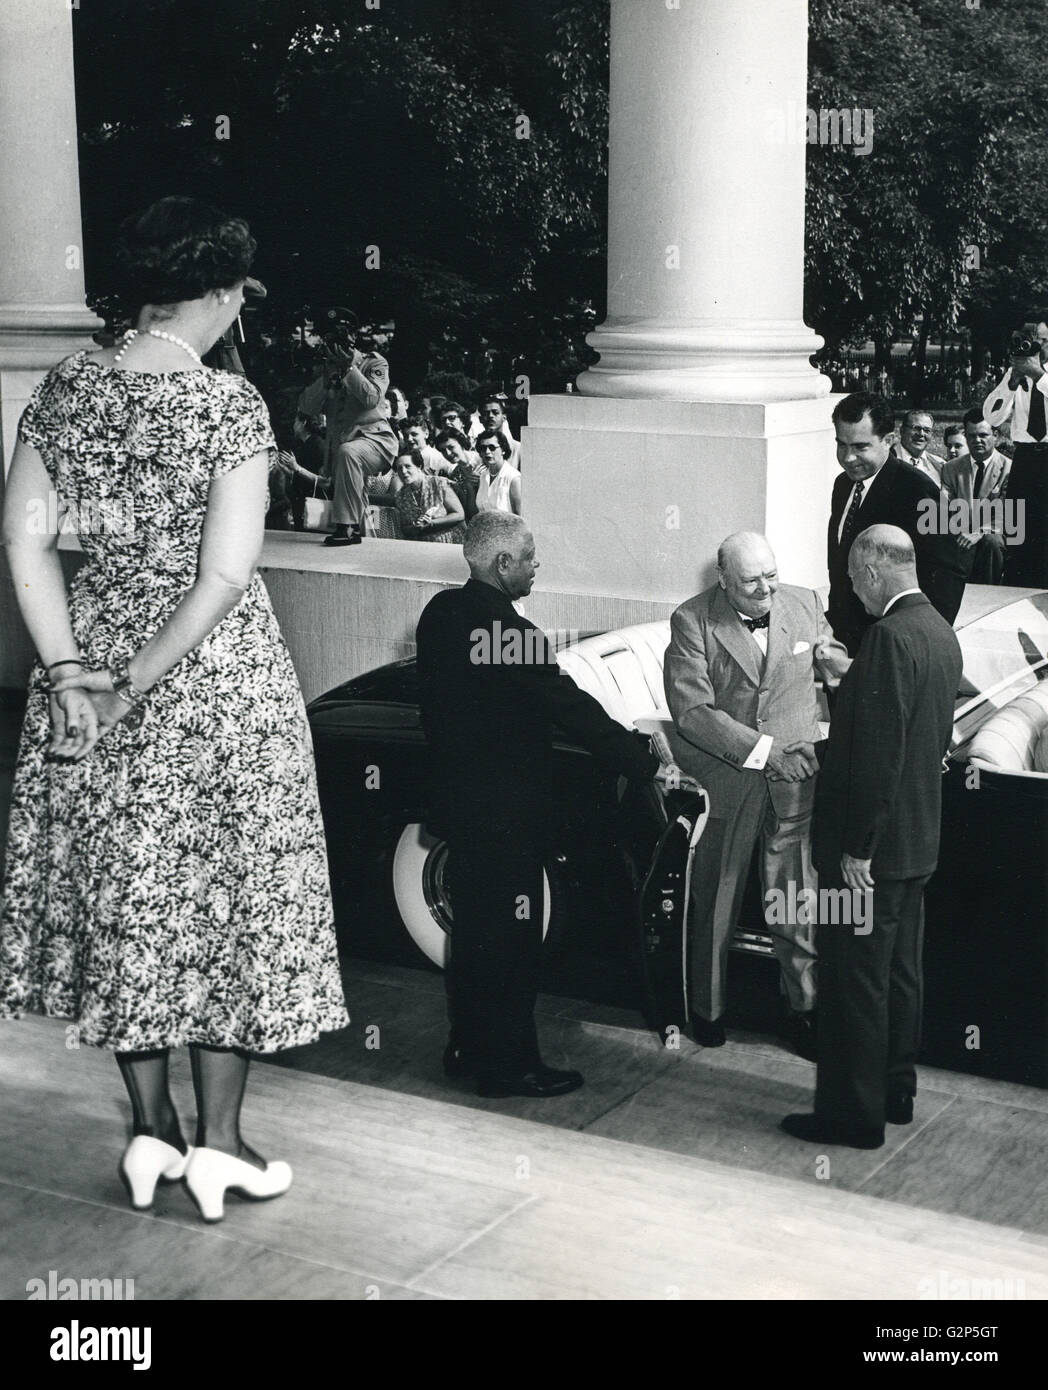 Mamie Eisenhower waits at the top of the steps as President Dwight Eisenhower greets Prime Minister Winston Churchill as he alights from a limousine at the White House. Vice-President Richard Nixon waits behind the British statesman. Stock Photo